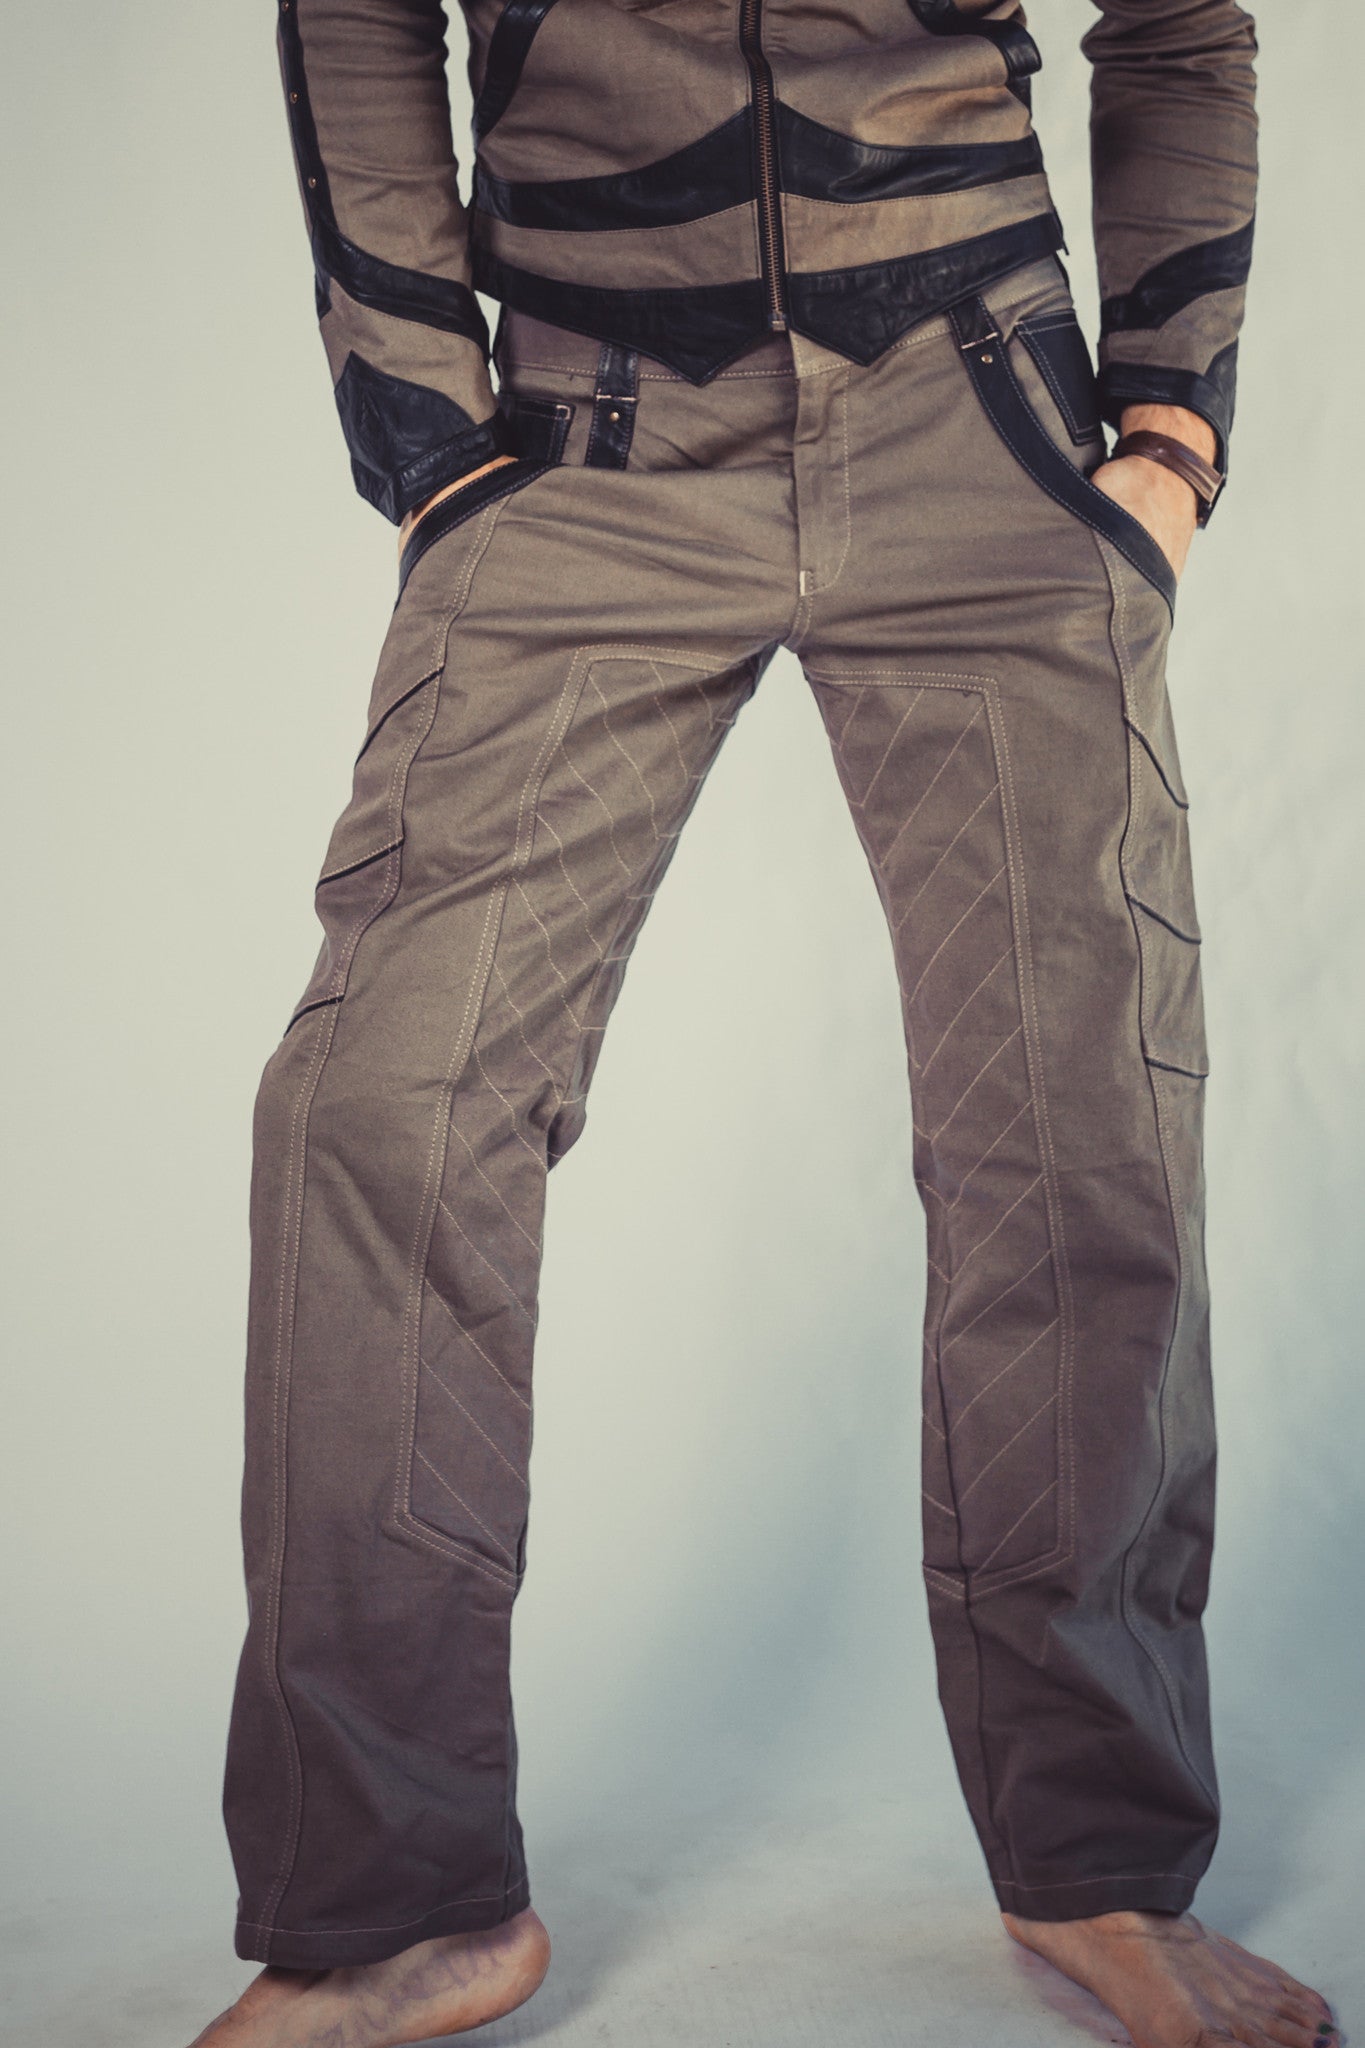 Chiseled Organic stretch denim and leather Pants - anahata designs